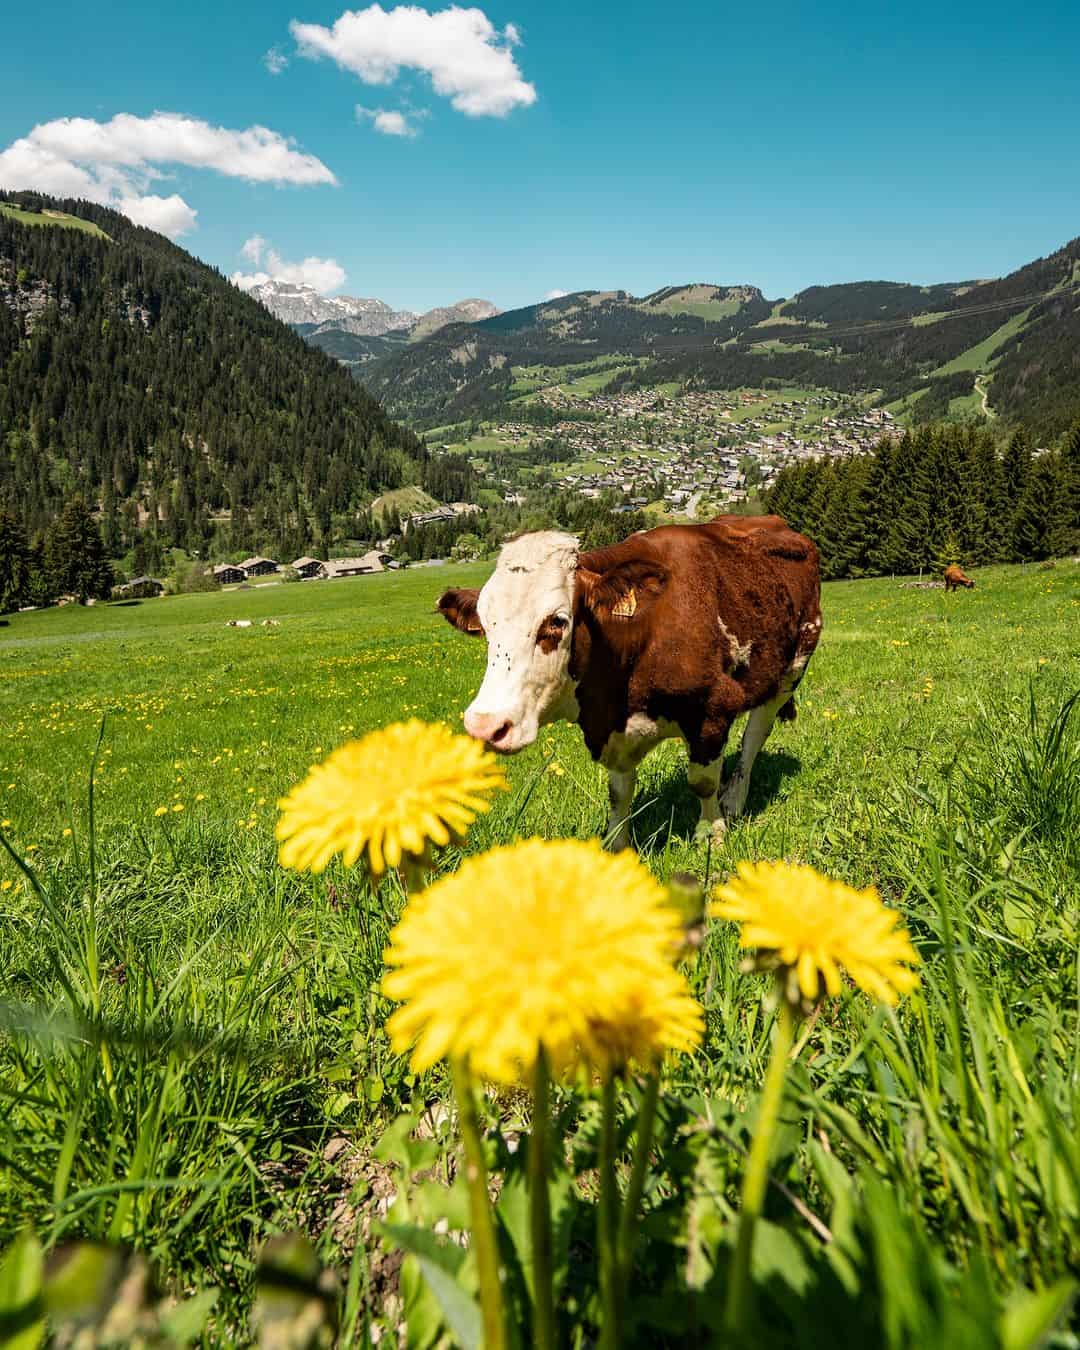 A brown and white cow in a mountain pasture, with yellow dandelions in the foreground and the village of Châtel in the background